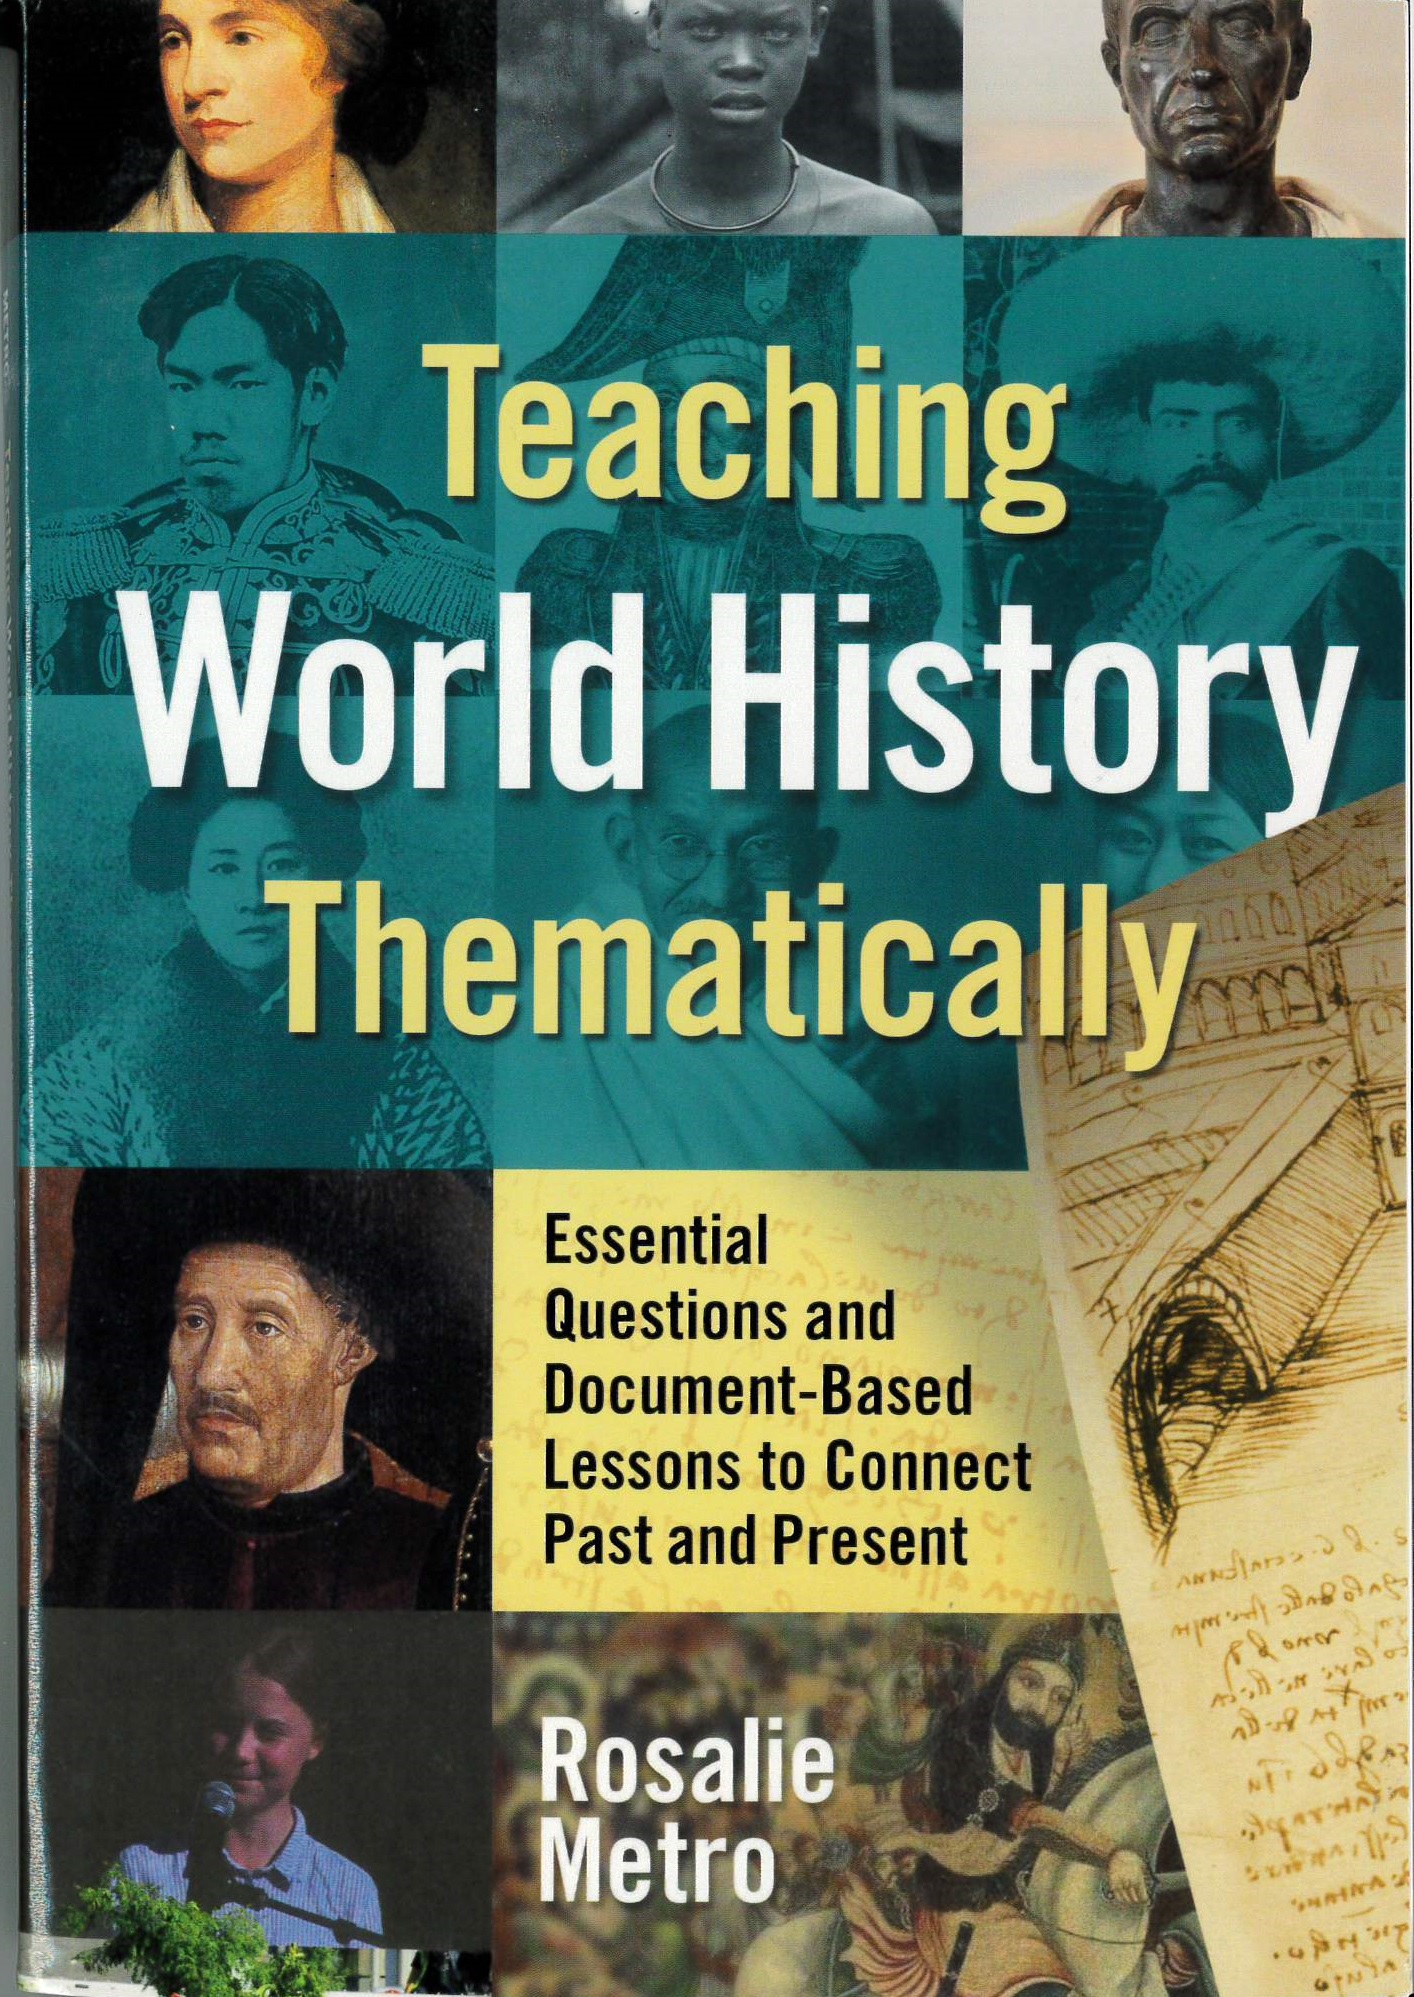 Teaching world history thematically : essential questions and document-based lessons to connect past and present